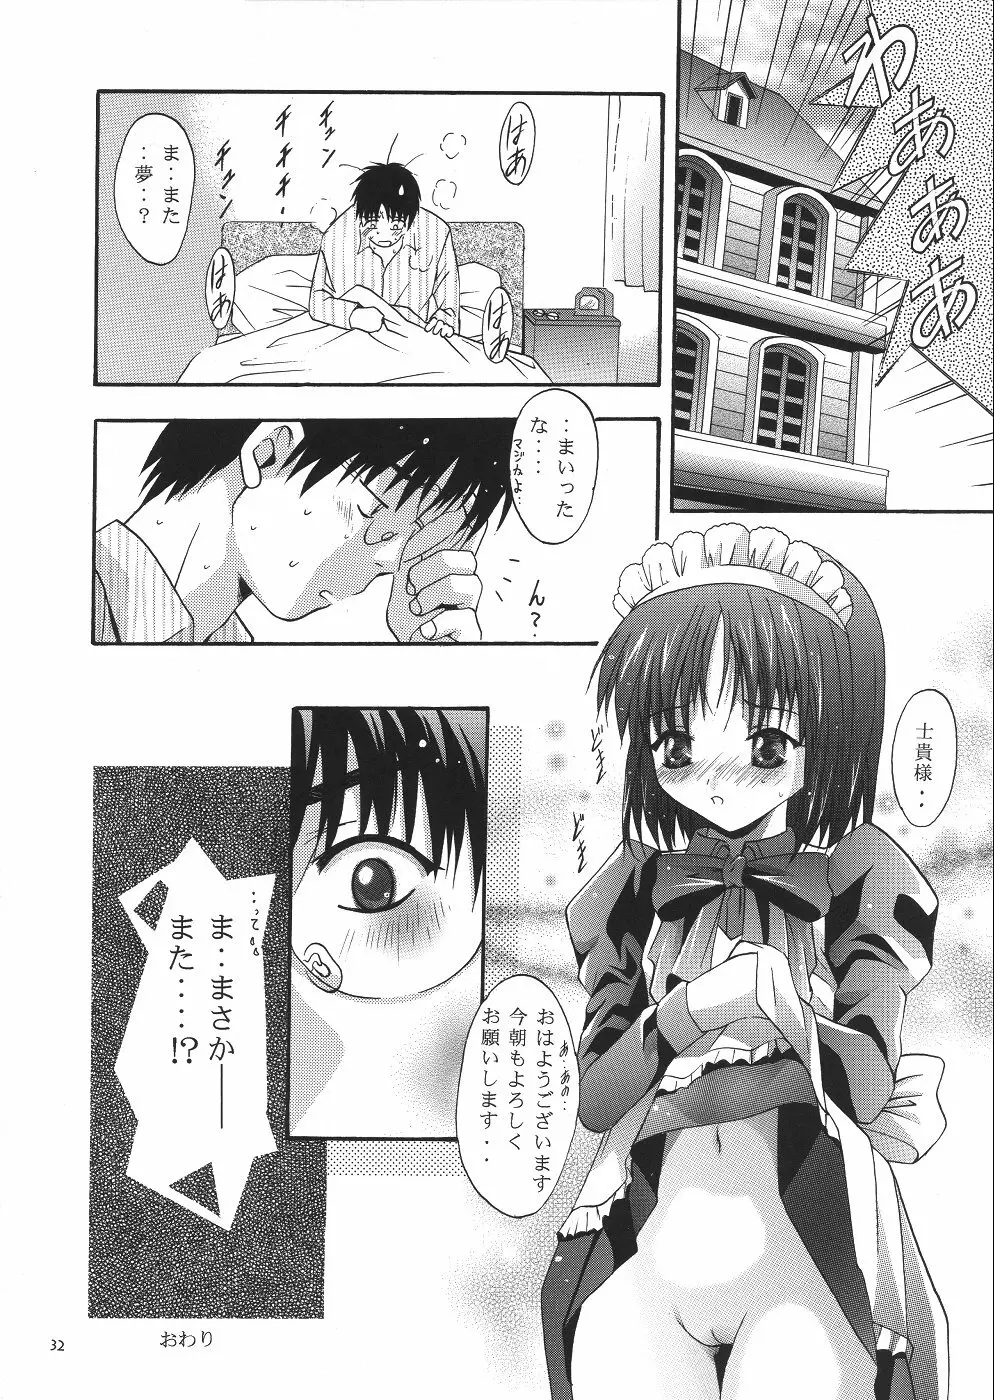 Mousou Theater 14 31ページ